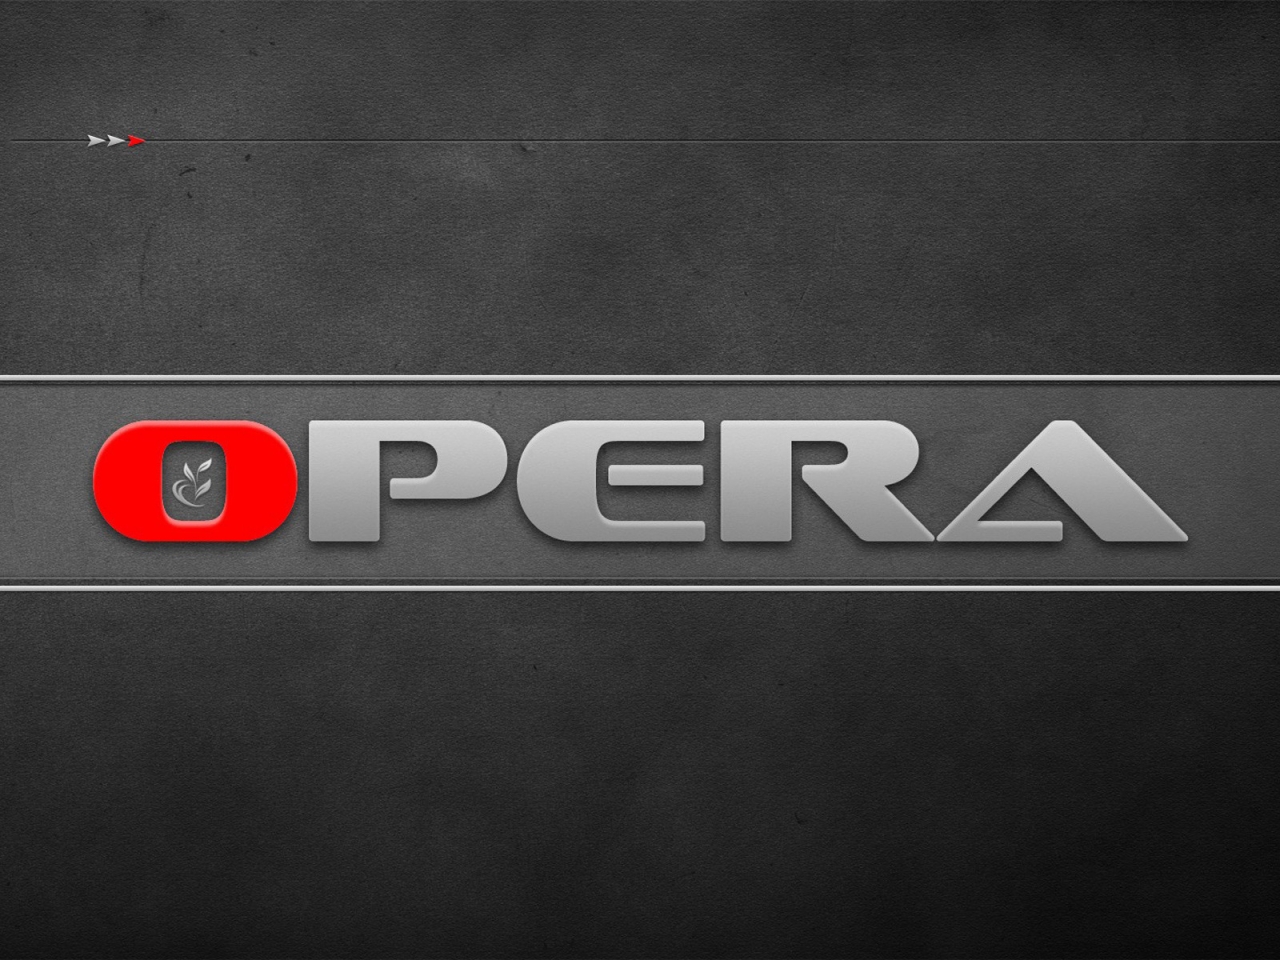 Opera for 1280 x 960 resolution